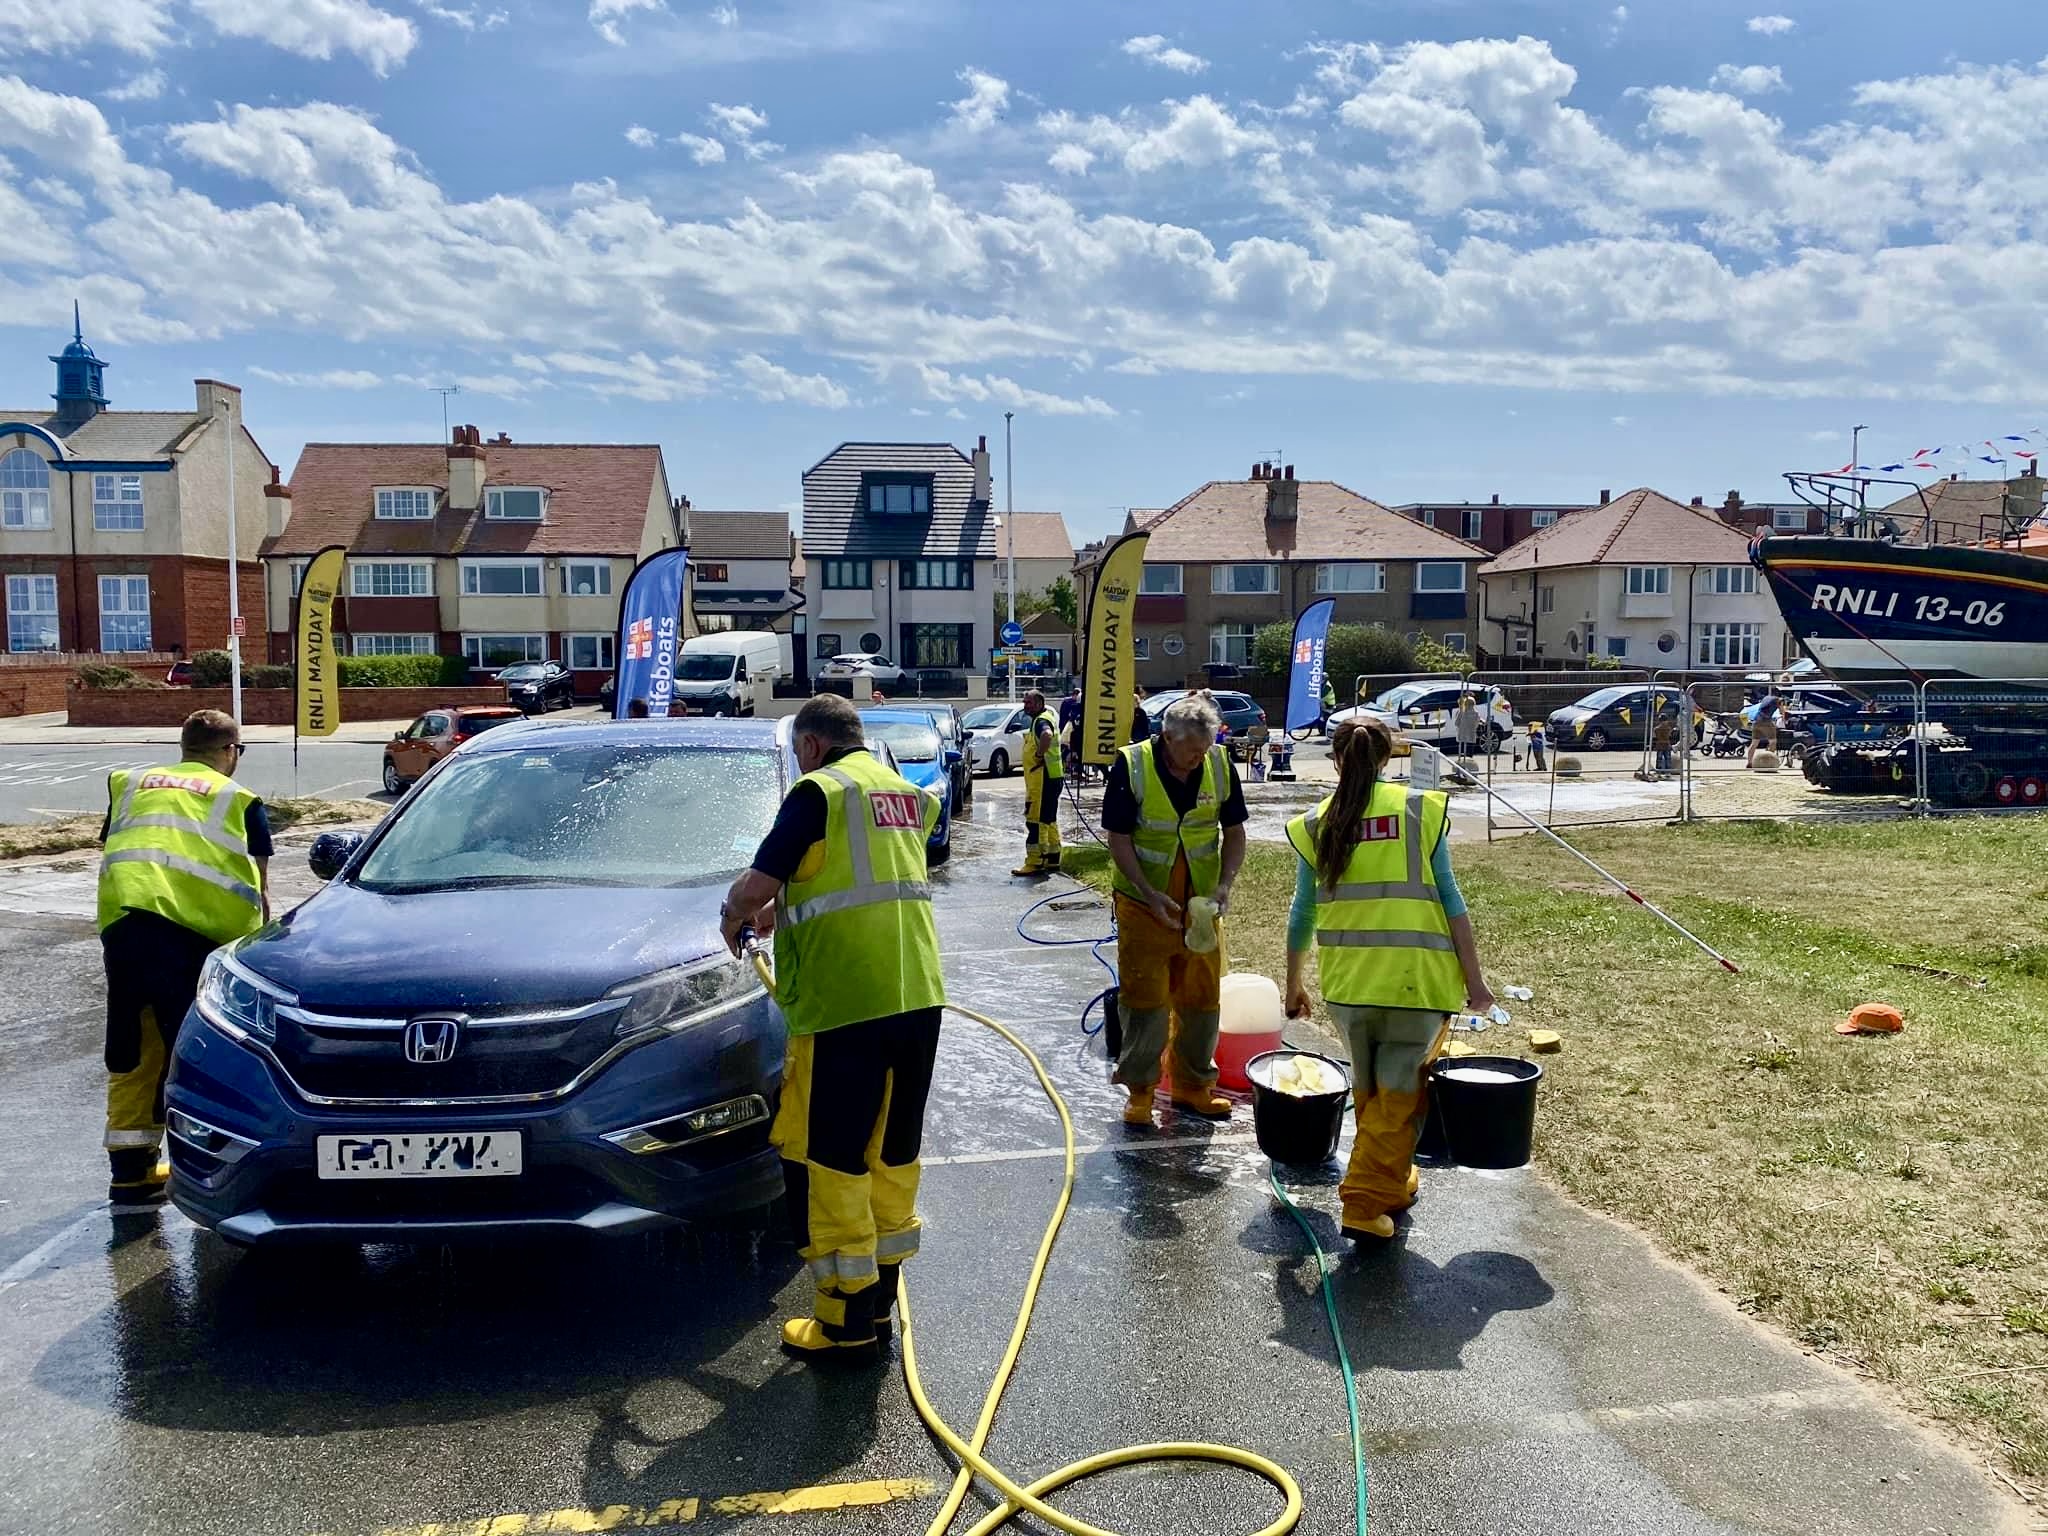 Hoylake lifeboat crew’s annual fundraising car wash to take place